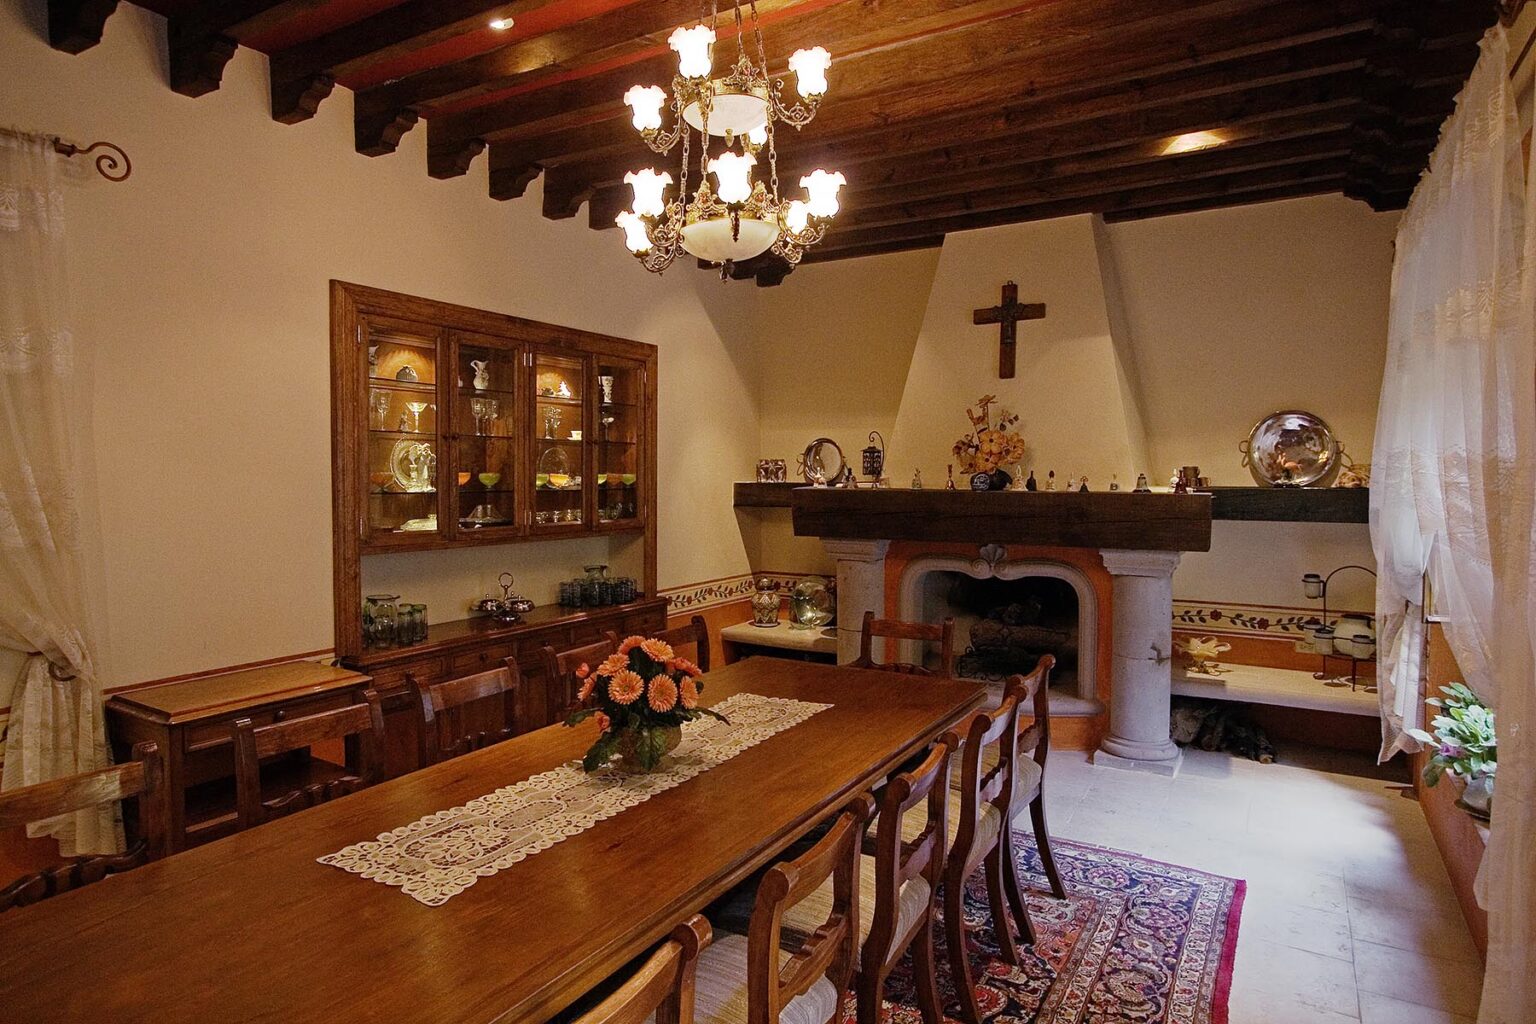 A wooden DINING ROOM TABLE and FIREPLACE in a house on the weekly HOUSE TOUR, SAN MIGUEL DE ALLENDE, MEXICO